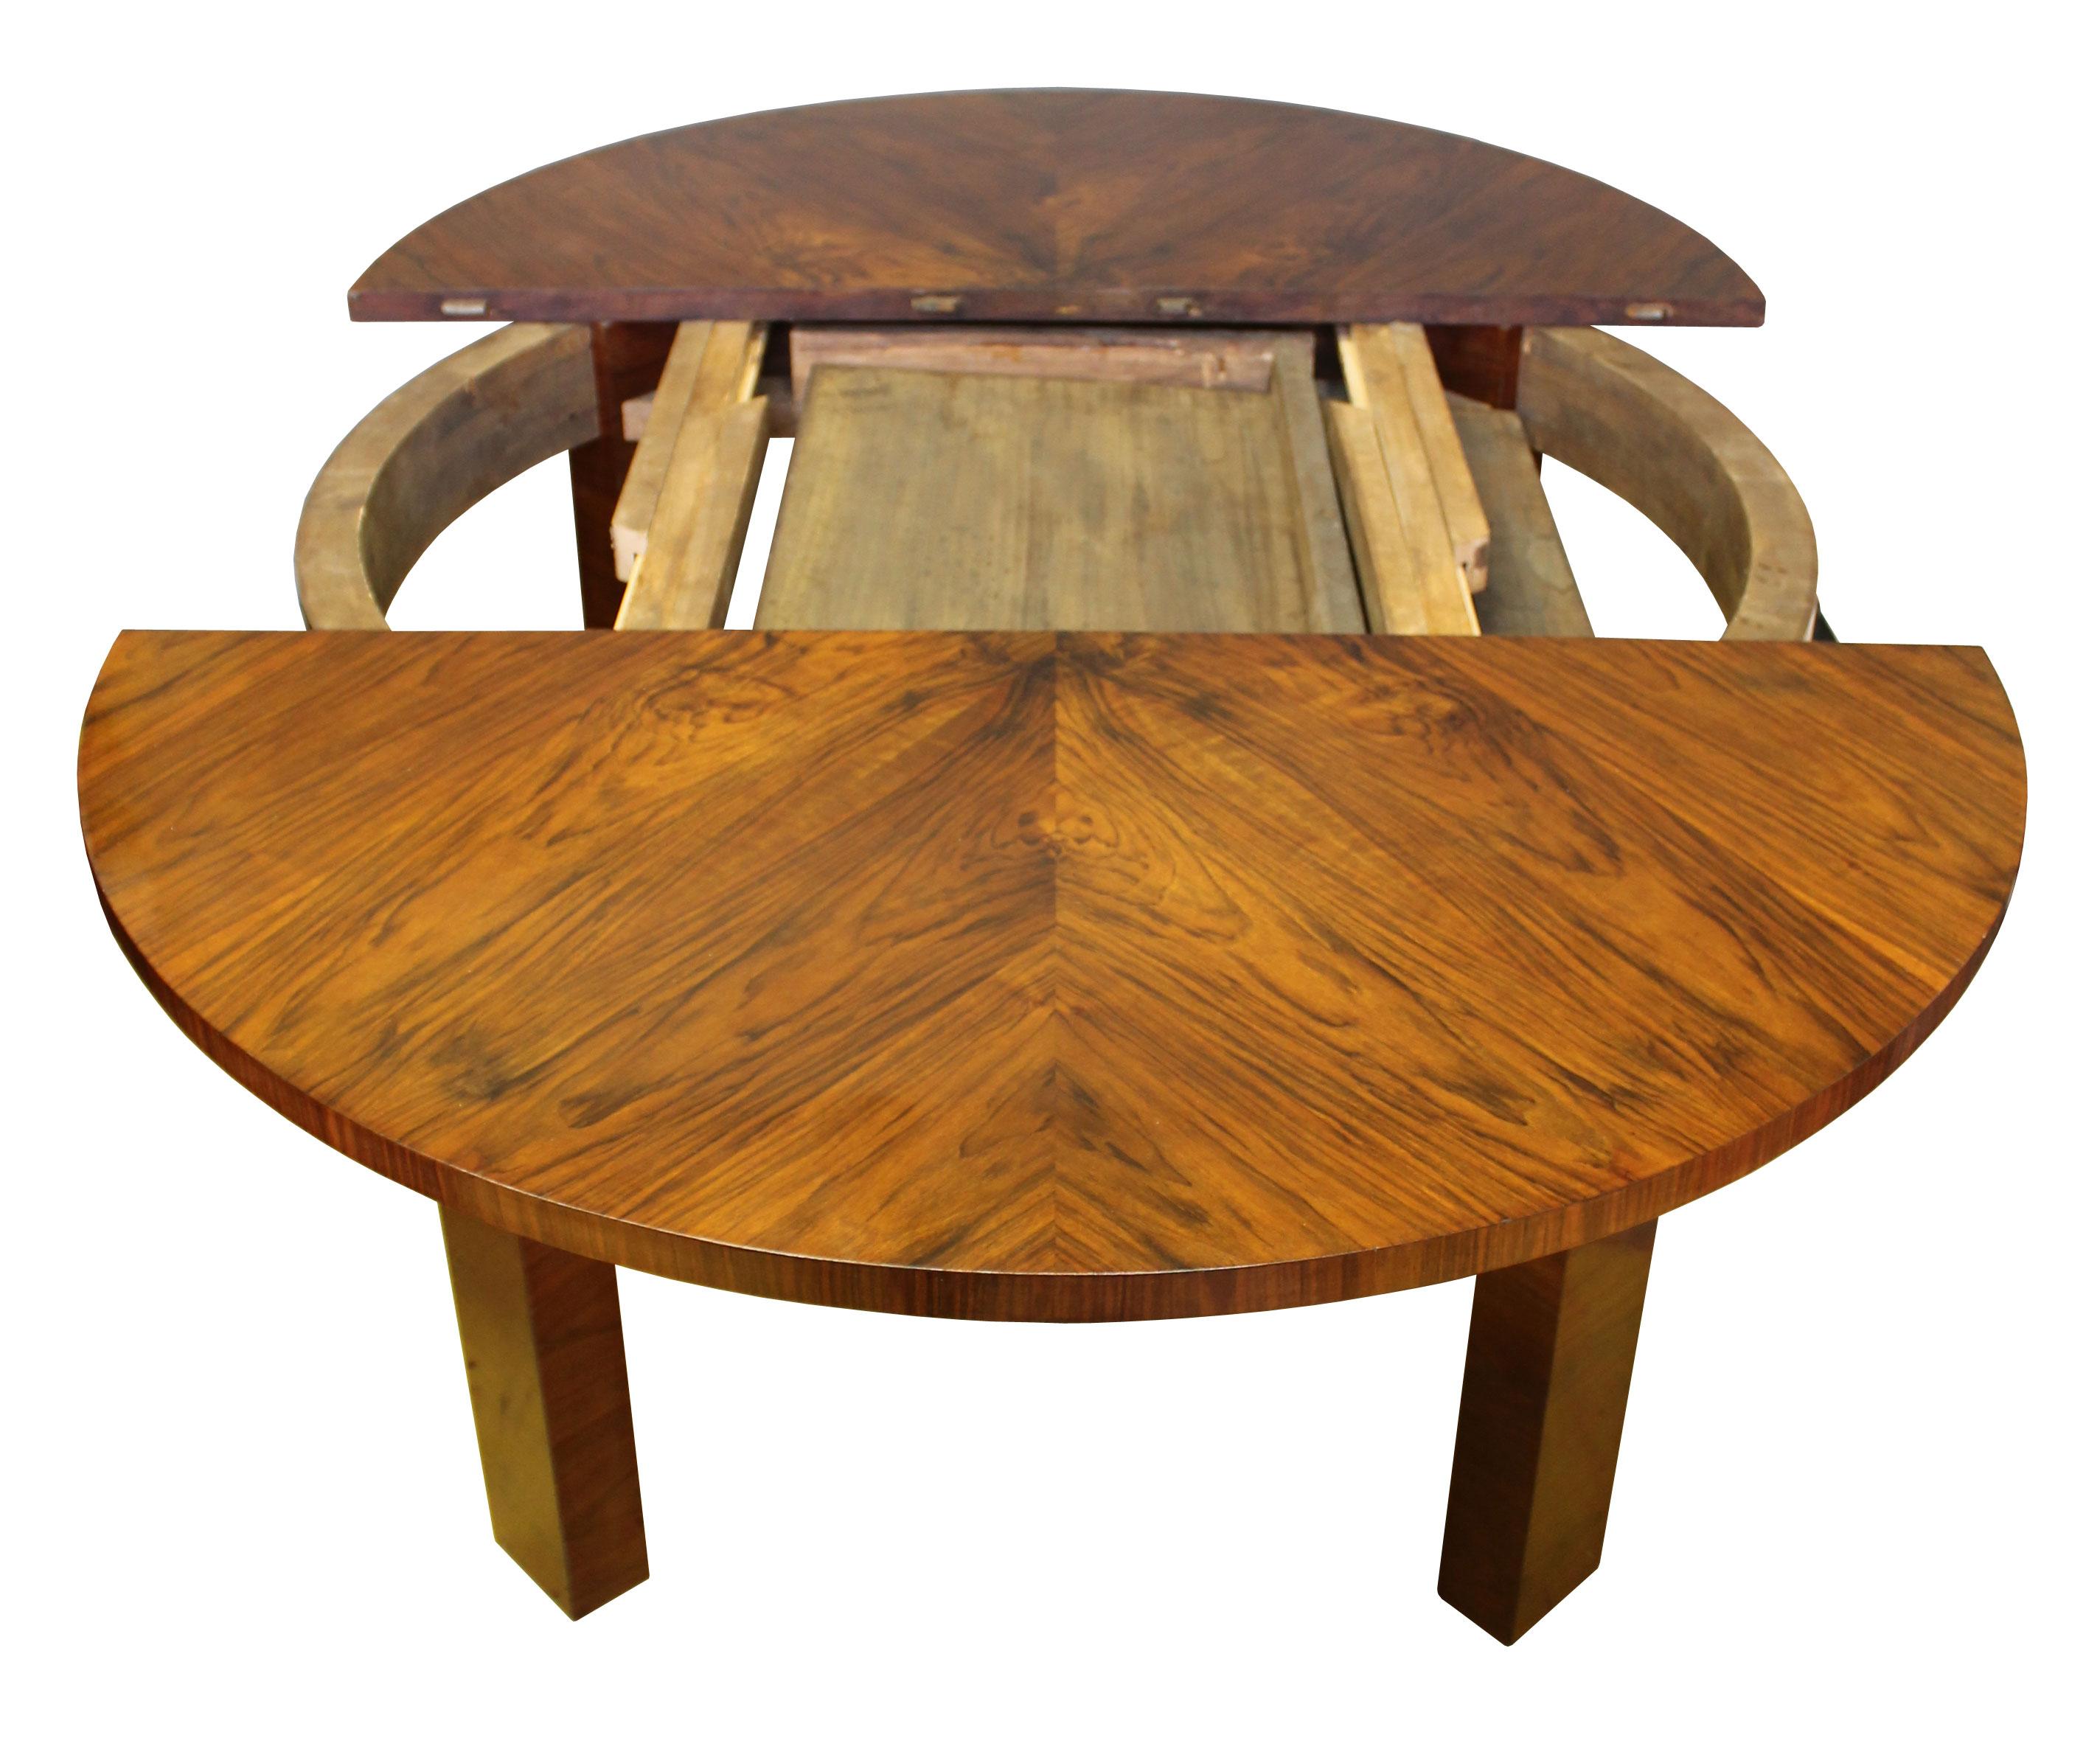 Czech 1930s Modernist Extendable Dining Table For Sale